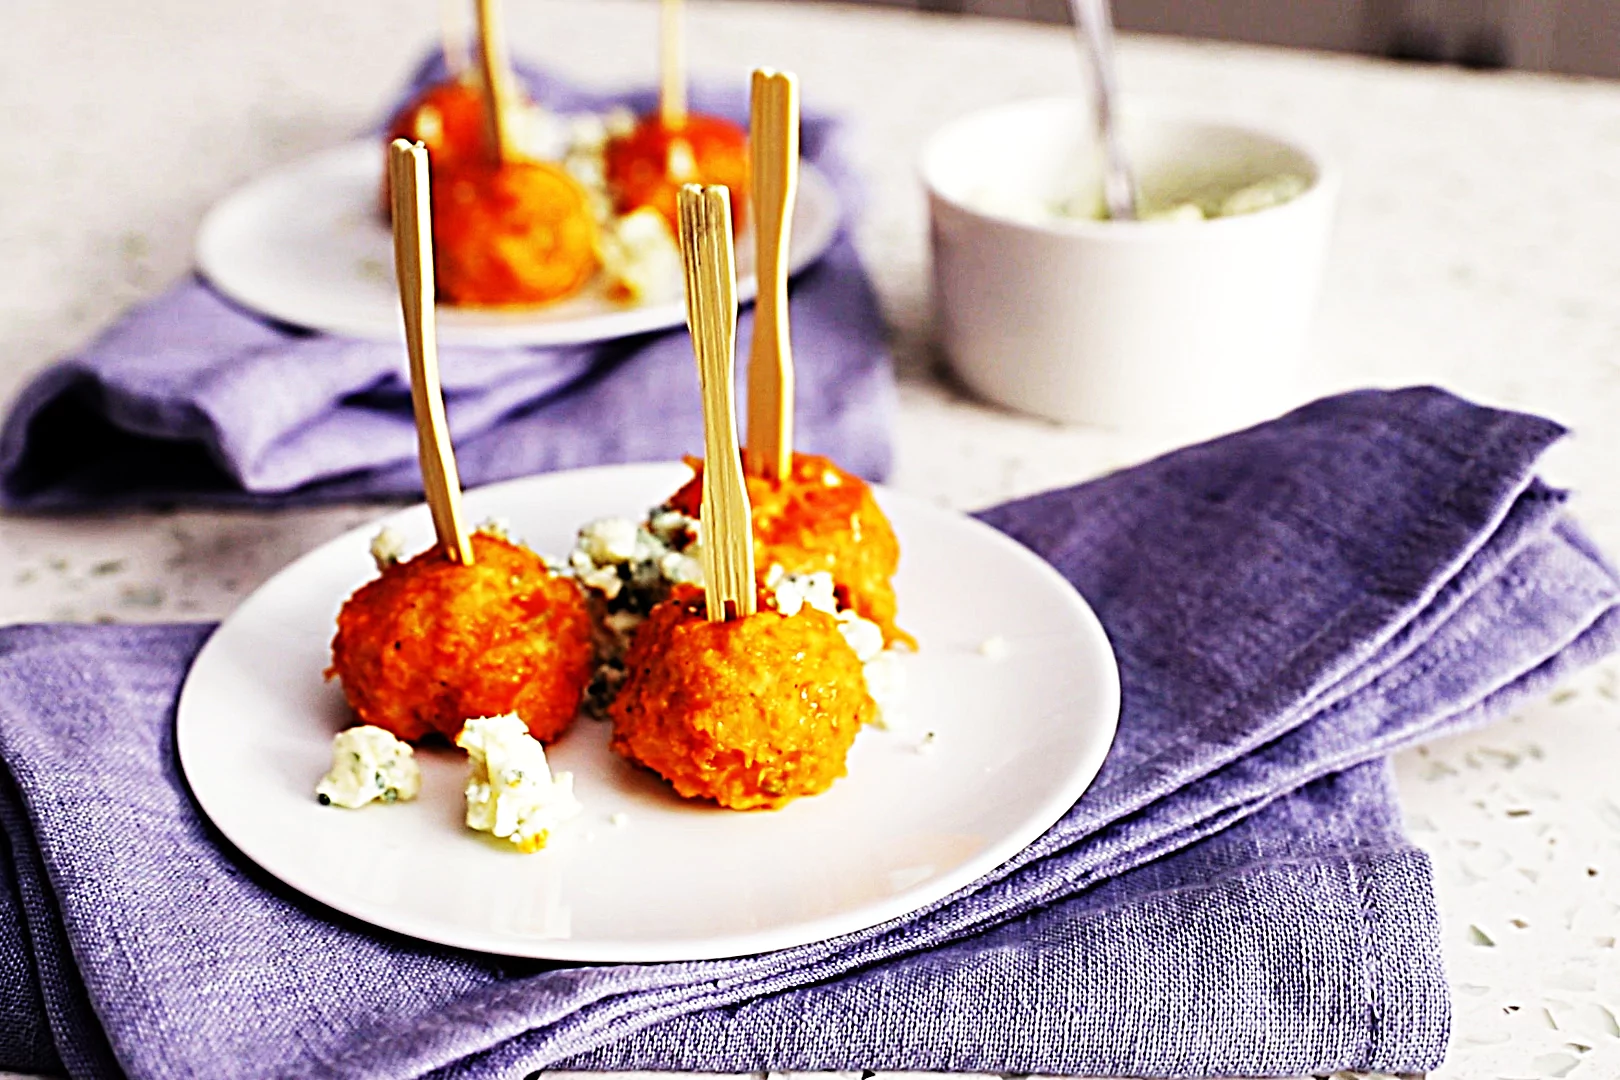 Stupid-Easy Recipe for Buffalo Chicken Meatballs (#1 Top-Rated)